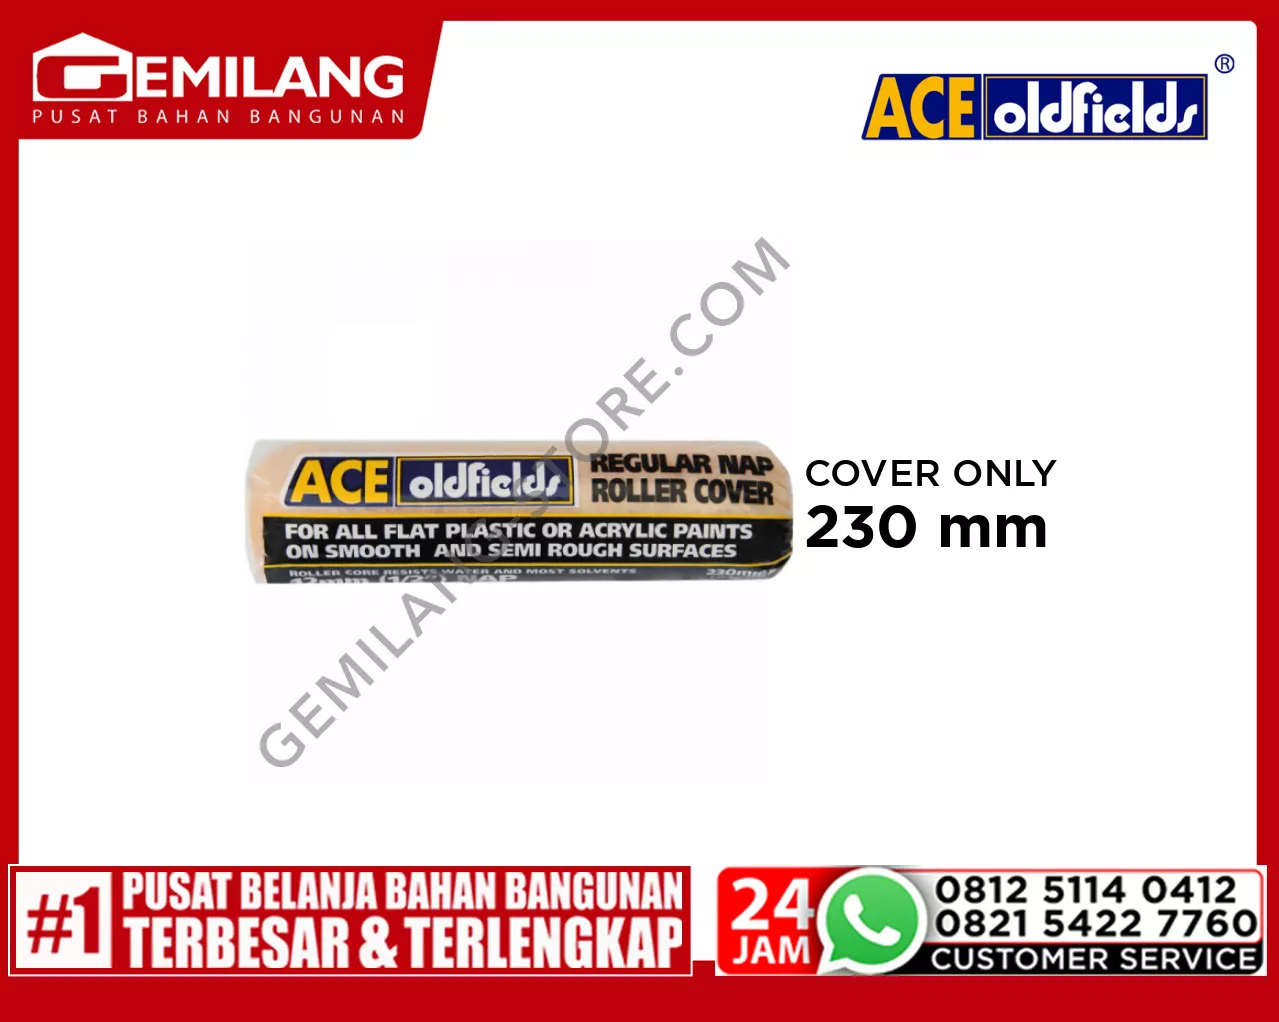 ACE OLDFIELDS COVER ONLY REGULAR 230mm